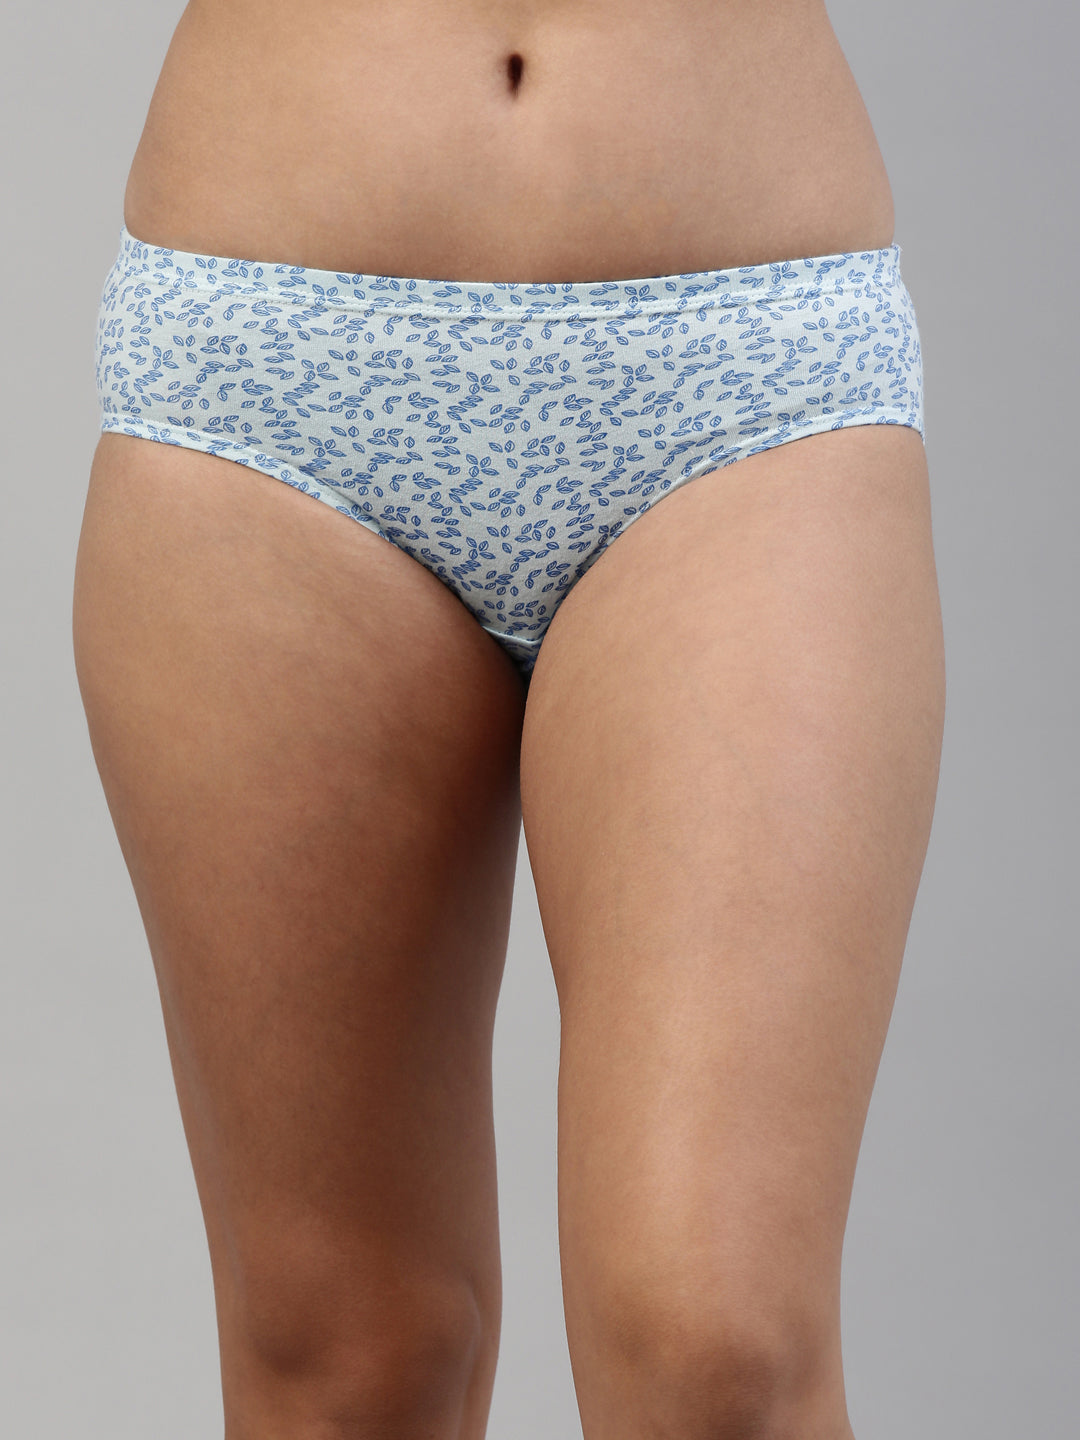 Amelie 102 Printed Cotton Hipster Panty for Women - Assorted Colours AS01